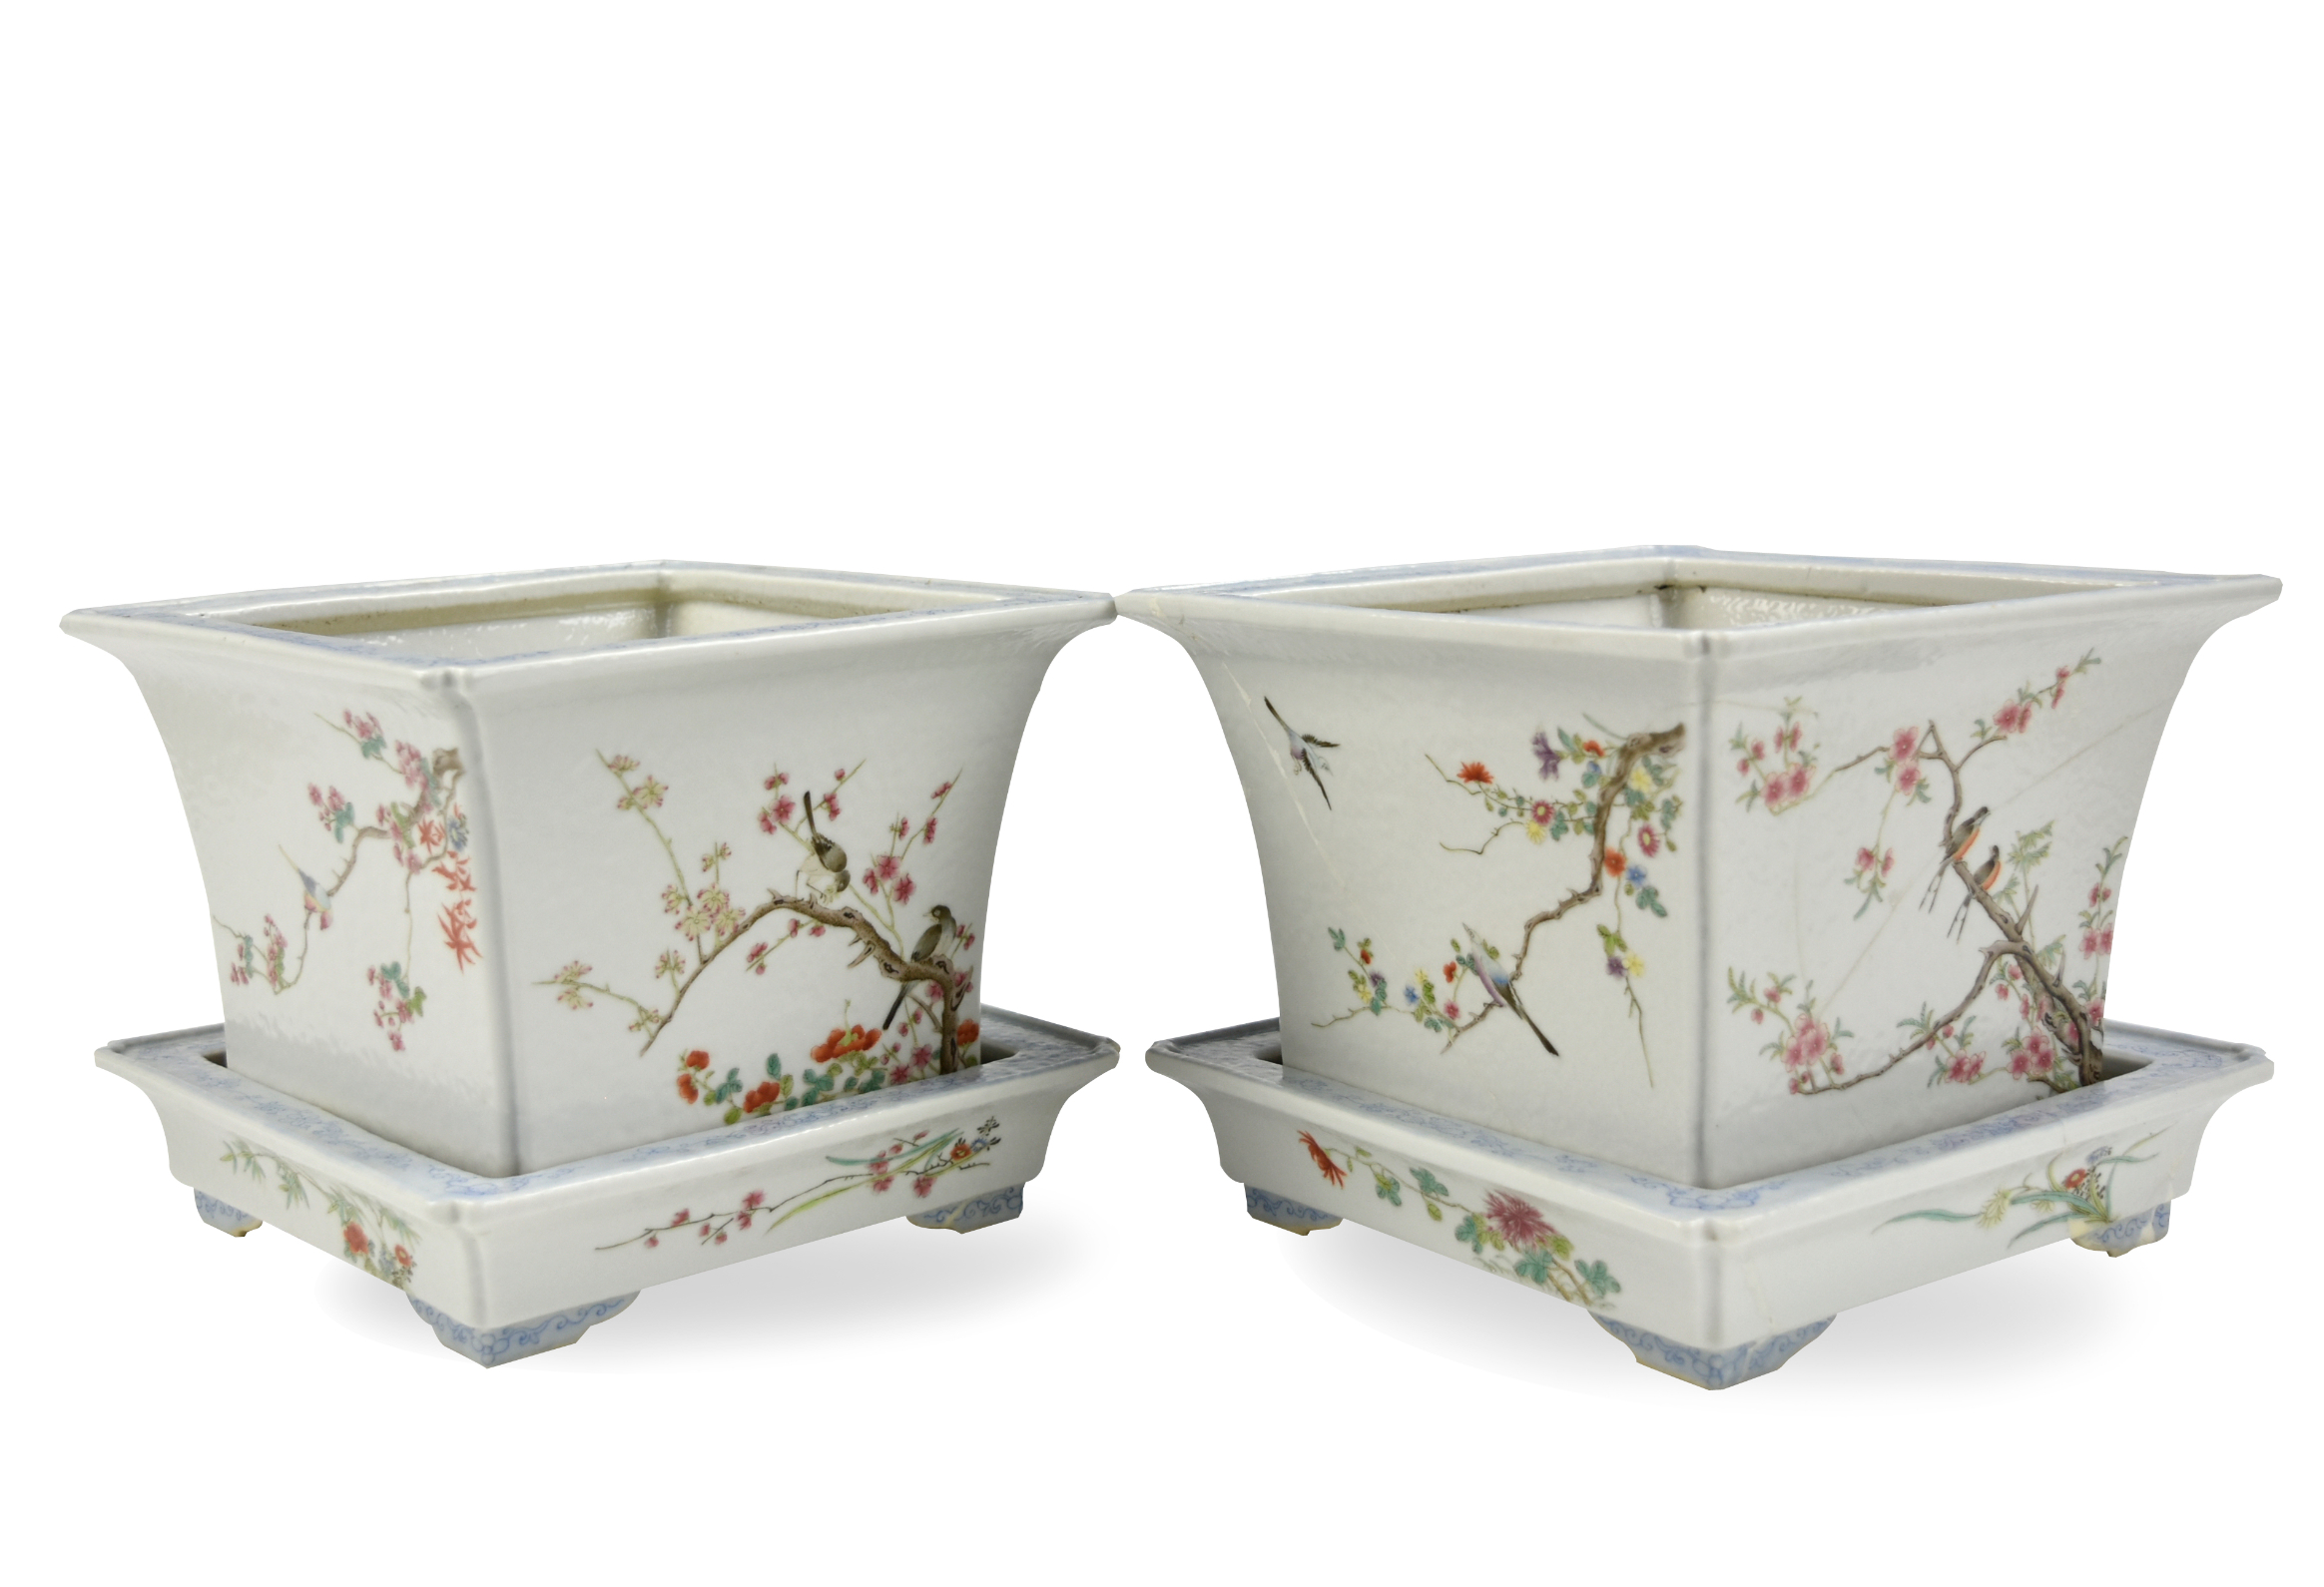 PAIR OF CHINESE FAMILLE ROSE PLANTERS 19 20TH 339697